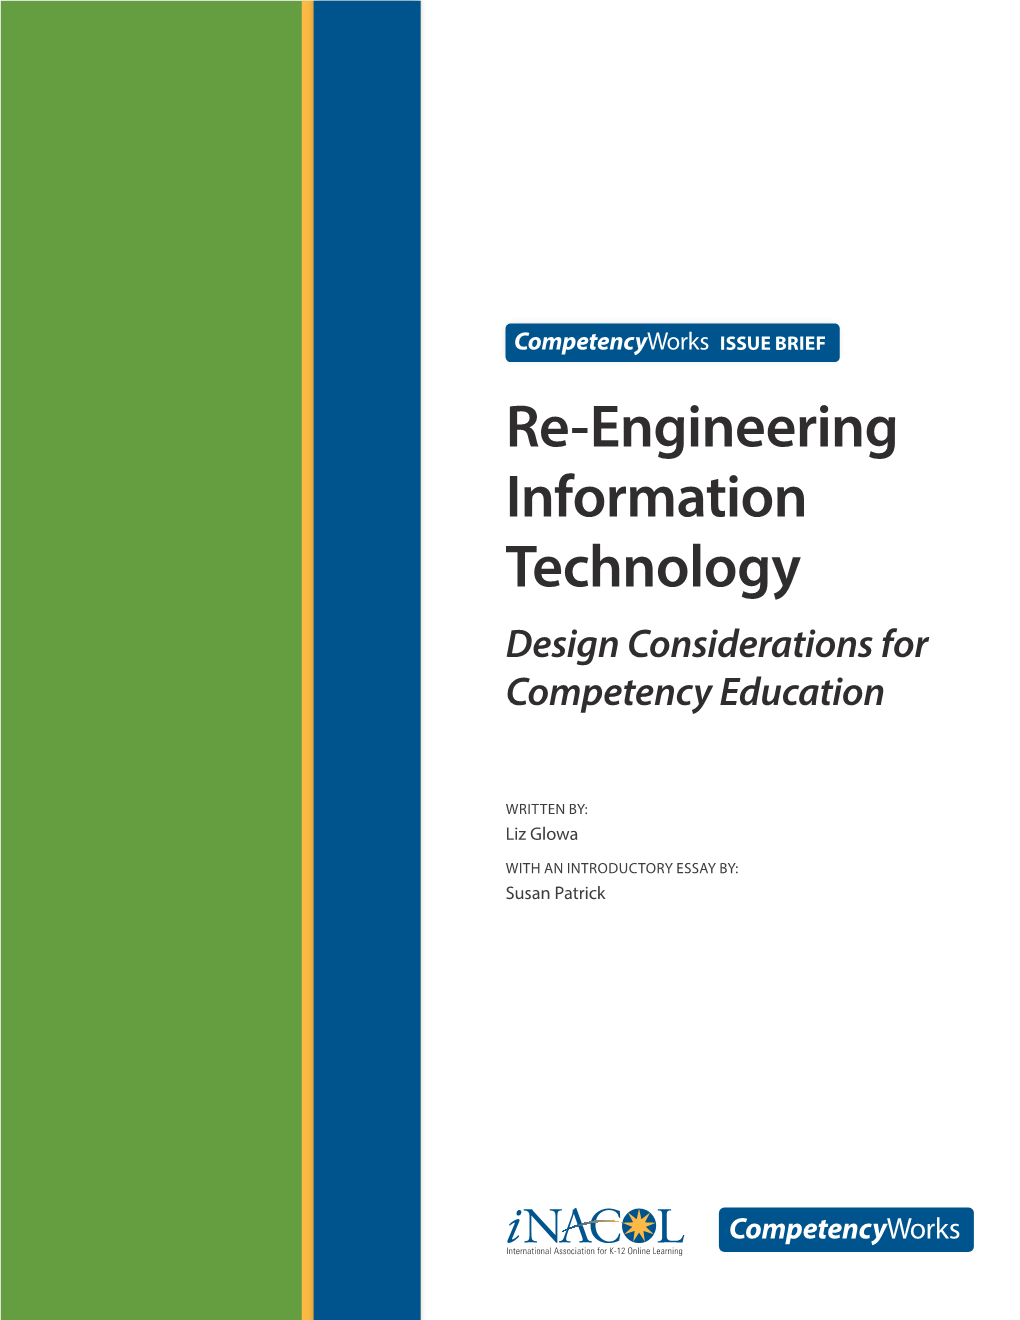 Re-Engineering Information Technology Design Considerations for Competency Education